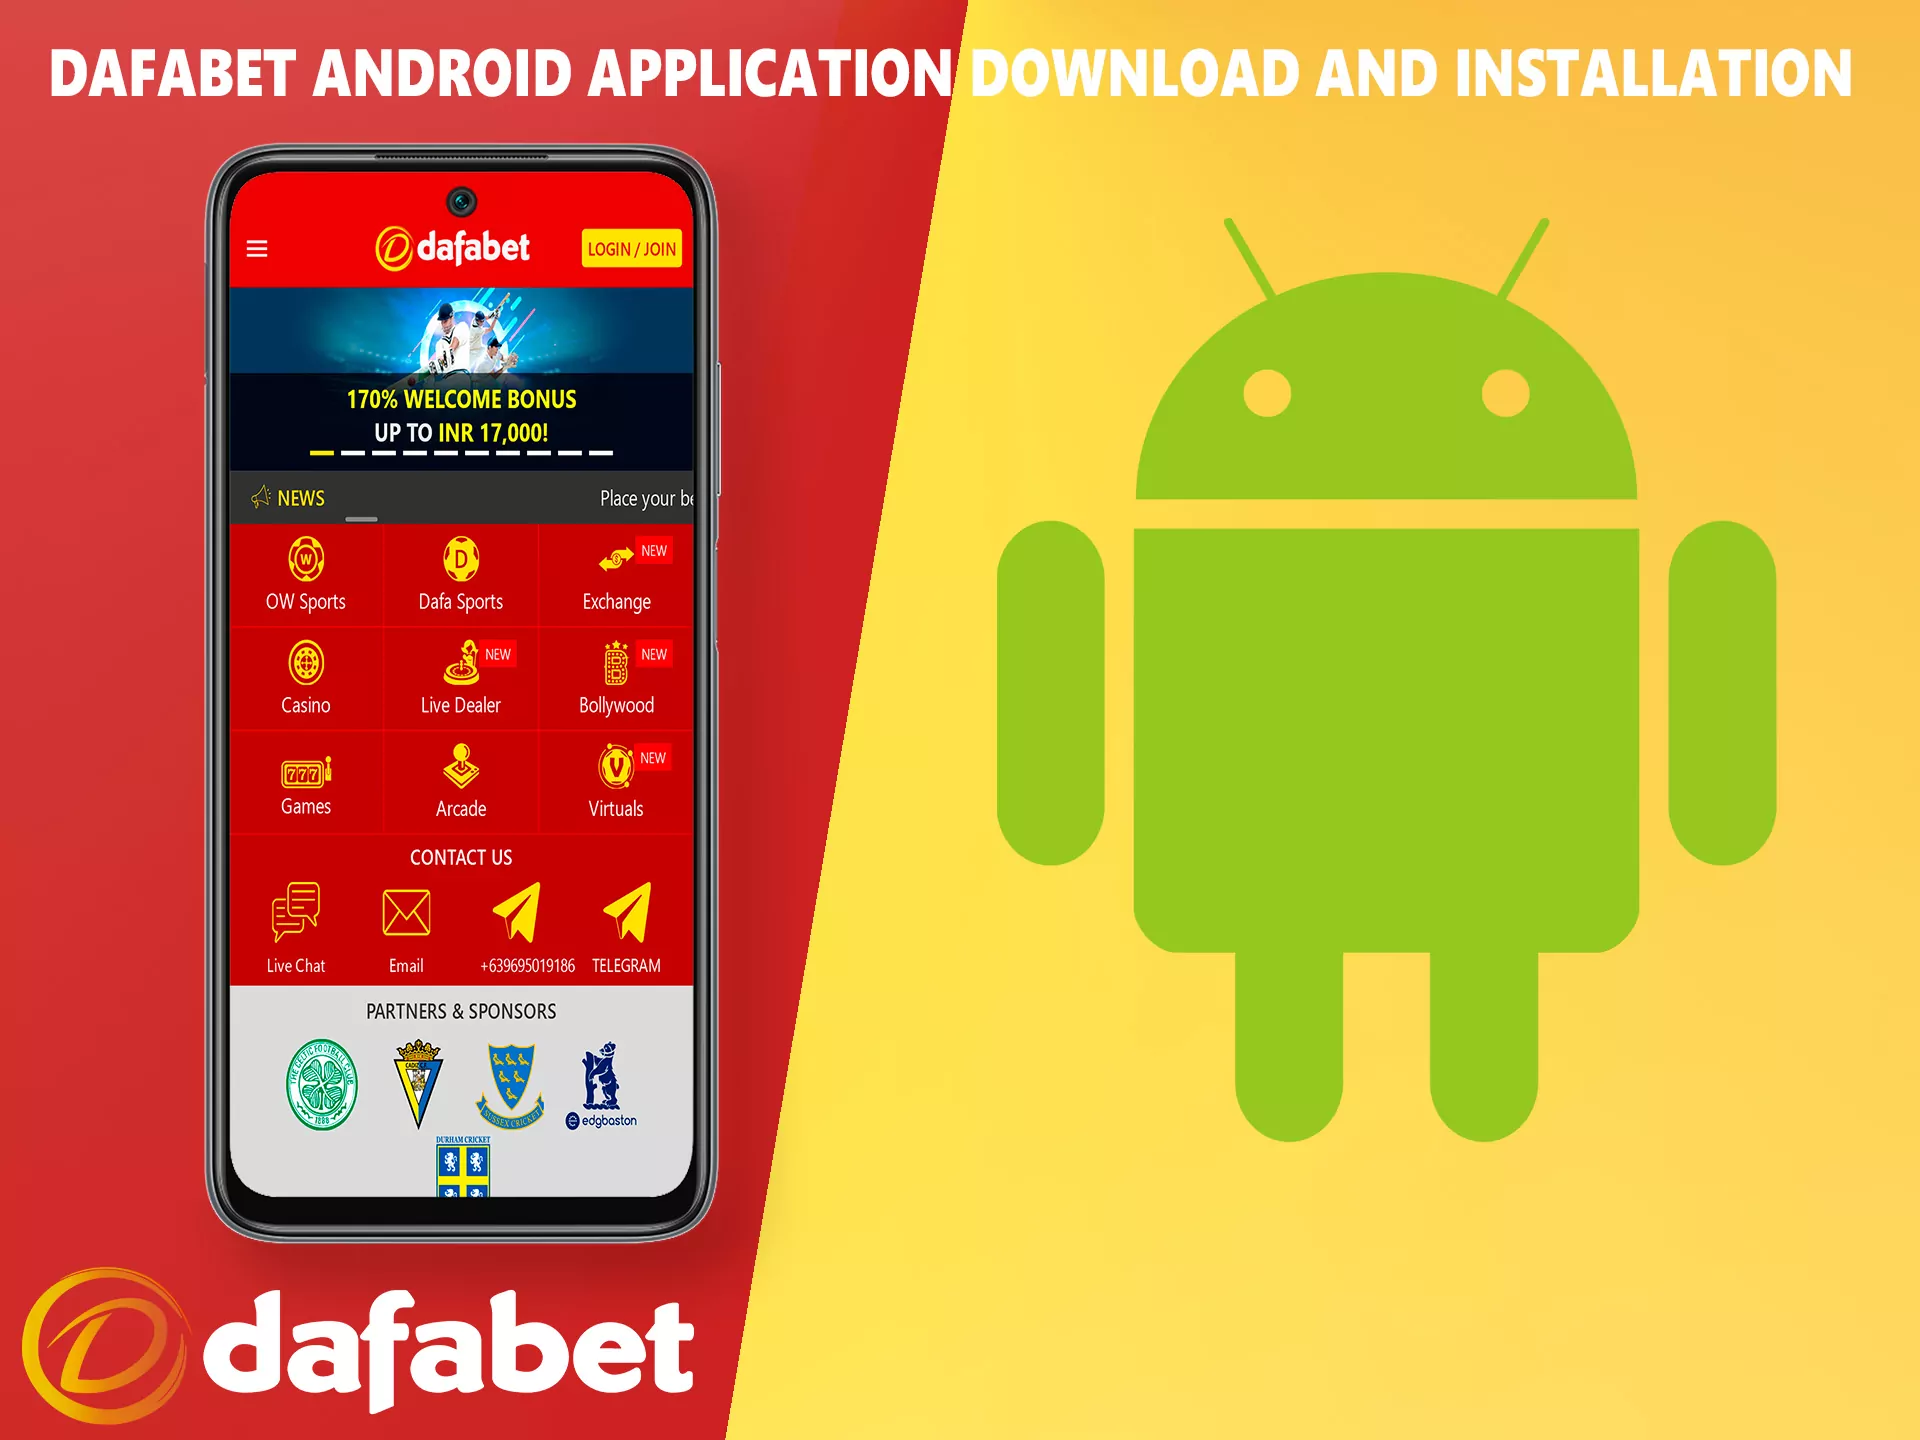 You can get the Dafabet app for Android by going to the official website and getting the app on your smartphone.